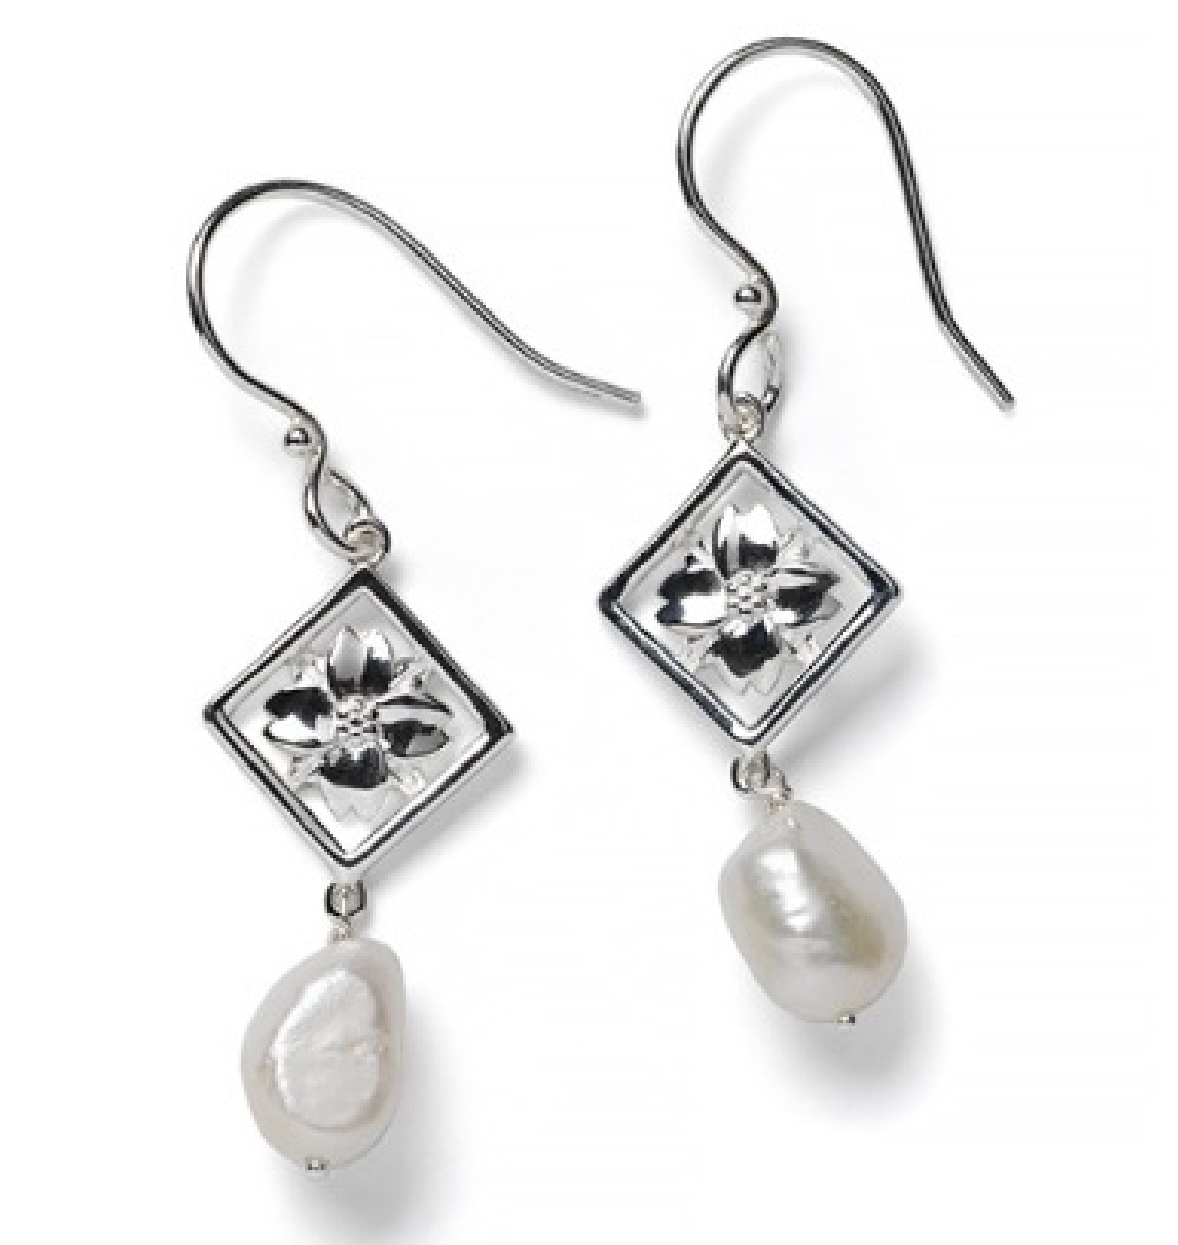 Southern Gates Sterling Silver Courtyard Series Dogwood Dangle Earrings with Baroque Pearl Drops

E746